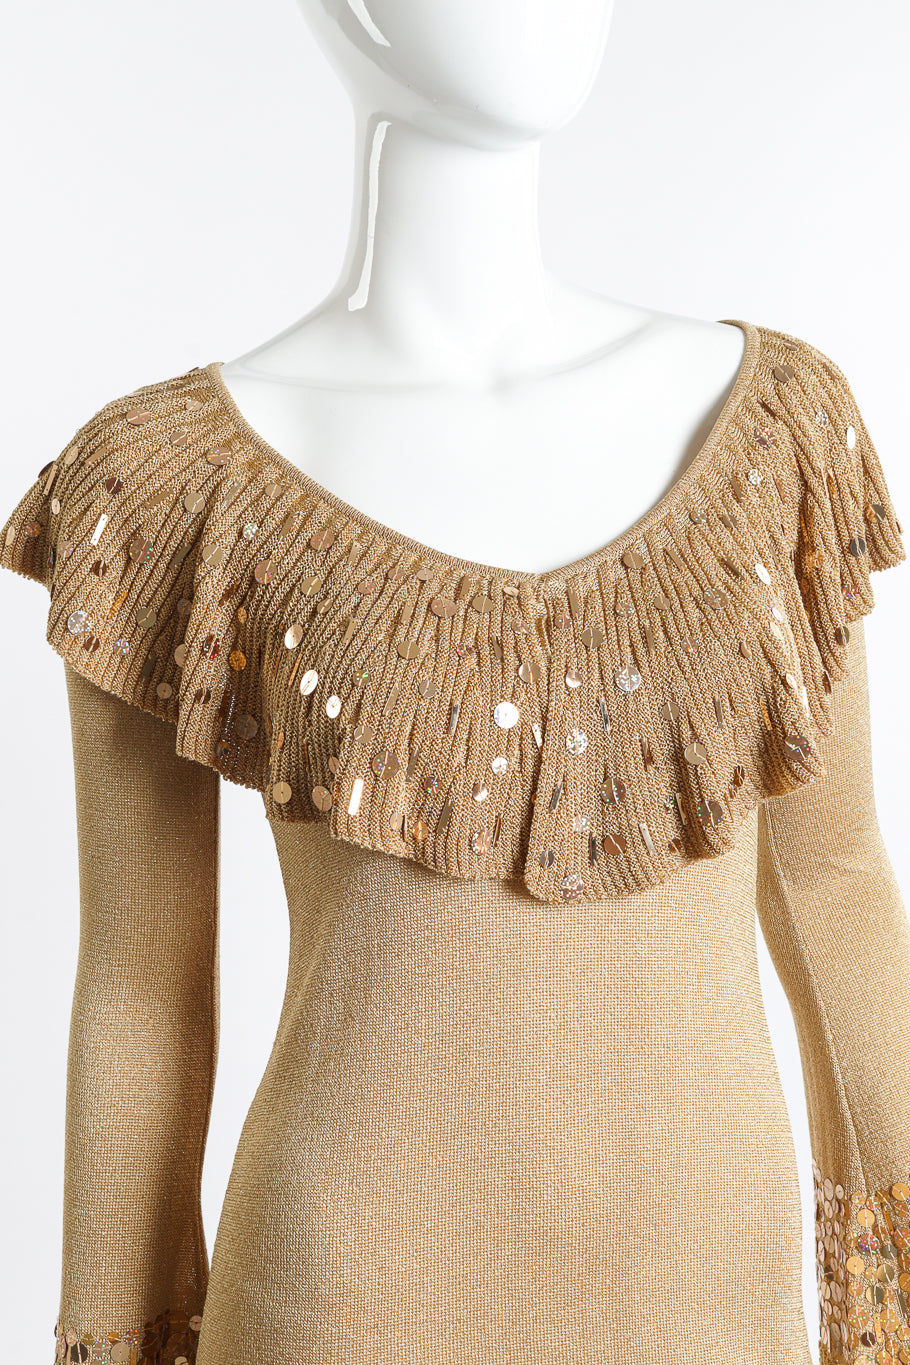 Vintage Blumarine gold sequin ruffle knit dress close up front view of the sequin bib on mannequin @Recess LA